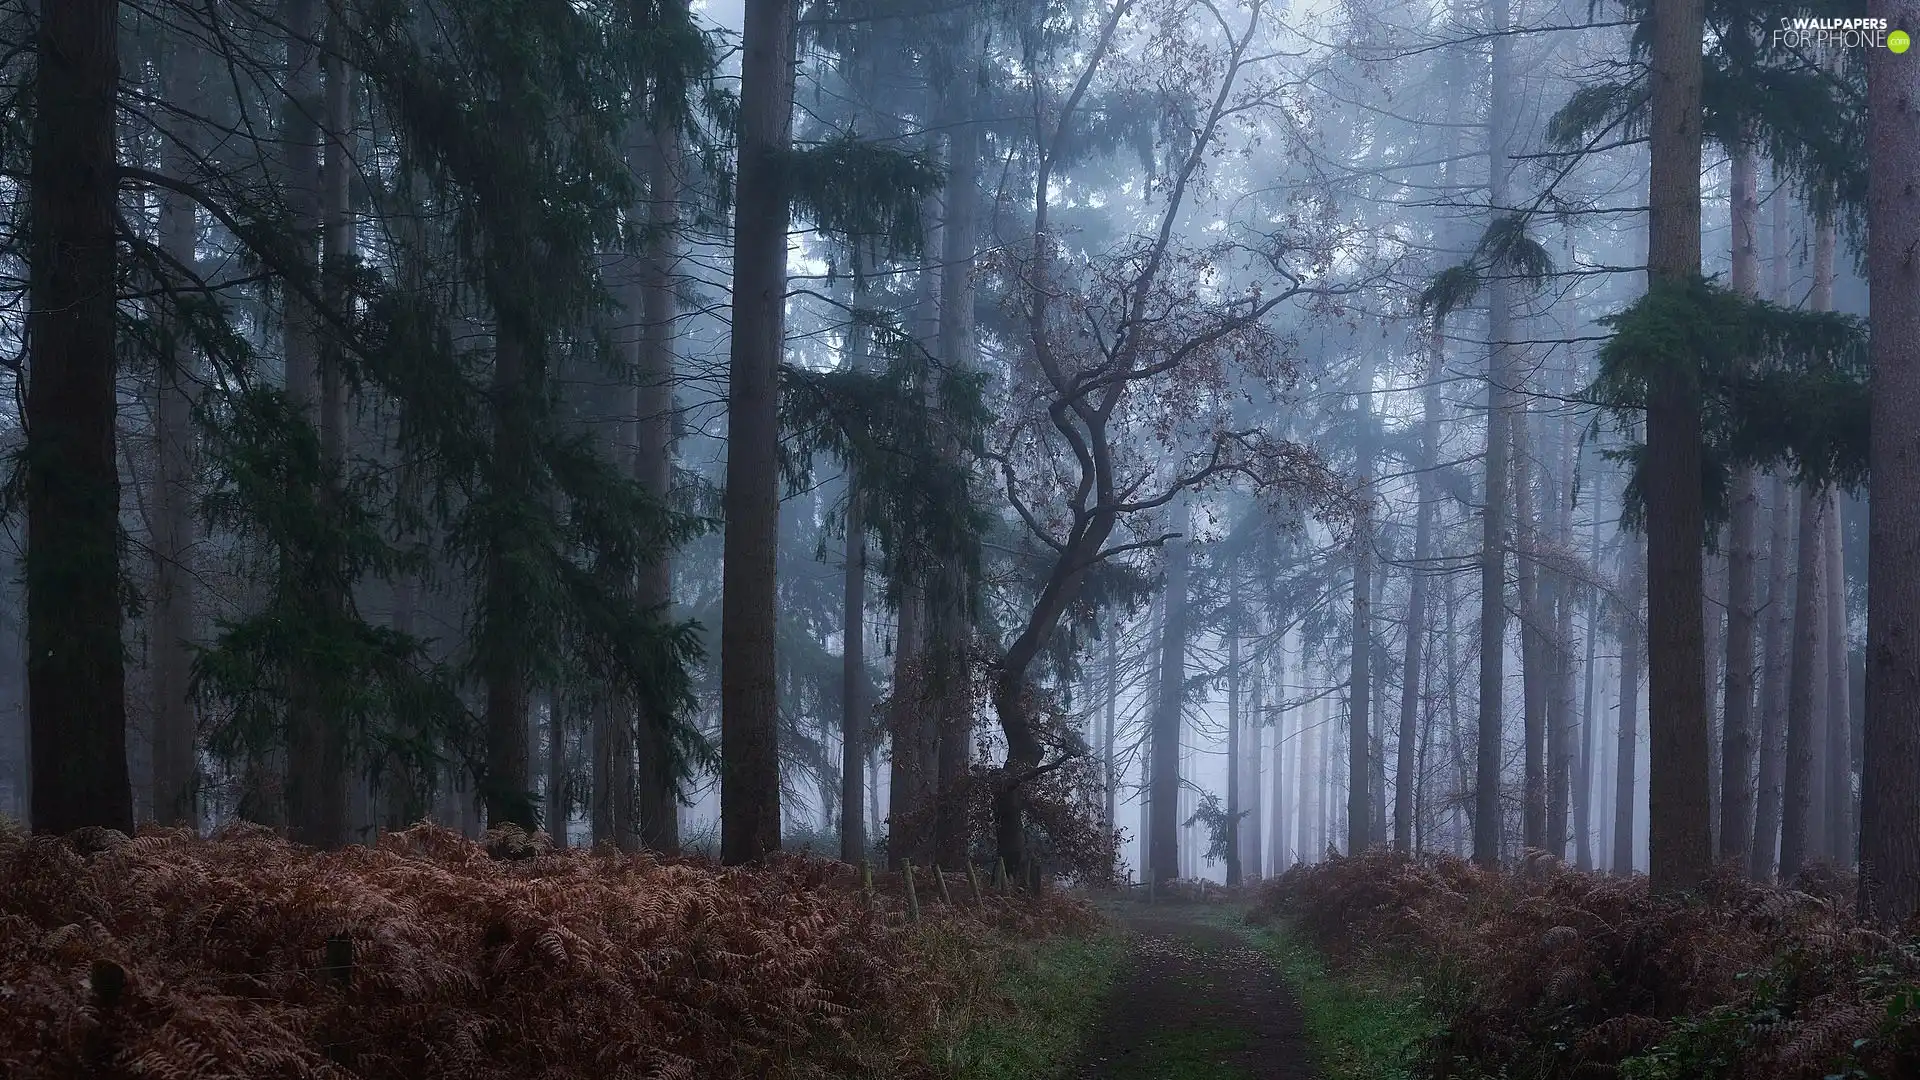 fern, Way, viewes, dried up, forest, trees, Fog